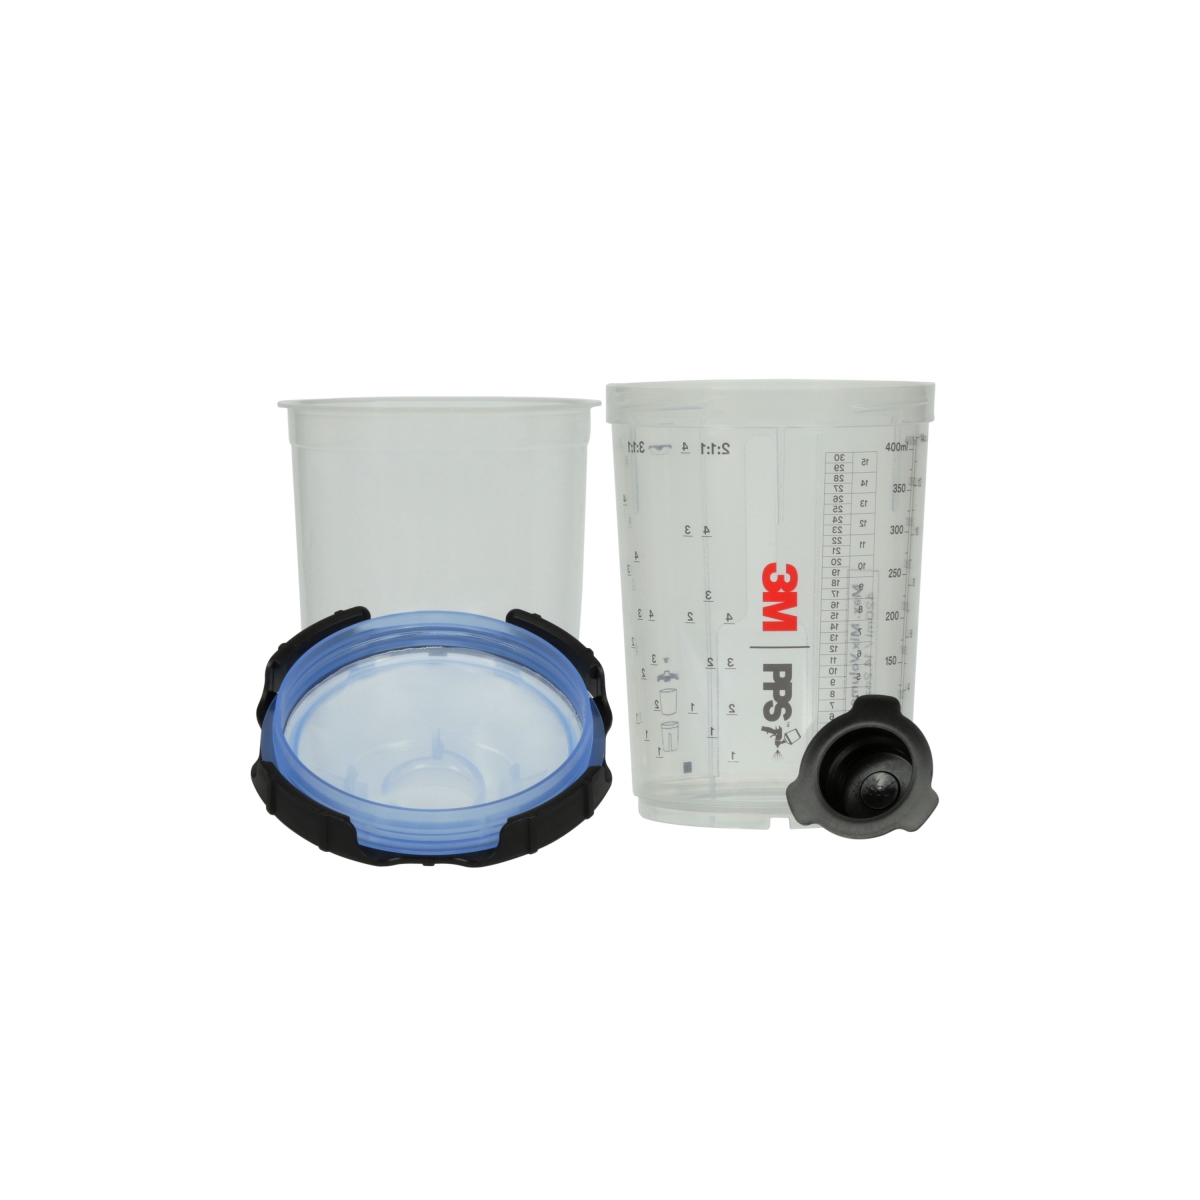 Picture of 3M 2PS-26312 13.5 oz PPS Series 2.0 Spray Cup System Kit with 125U Micron Filter - Midi